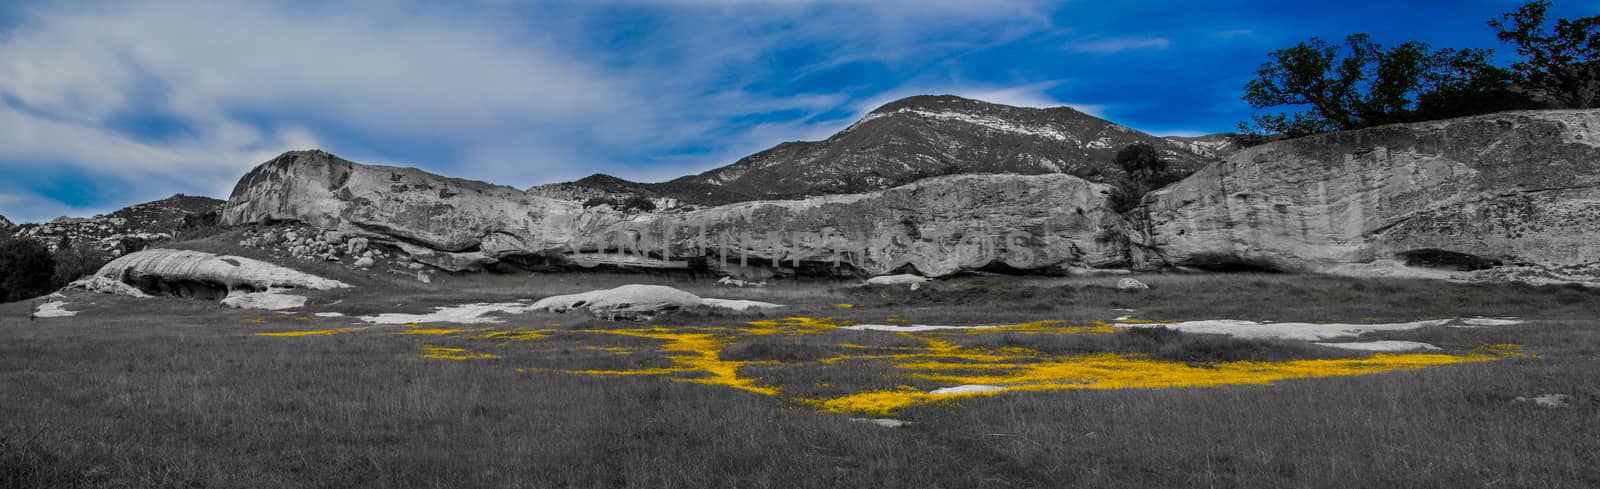 Yellow flowers in a meadow surrounded by rock cliffs.